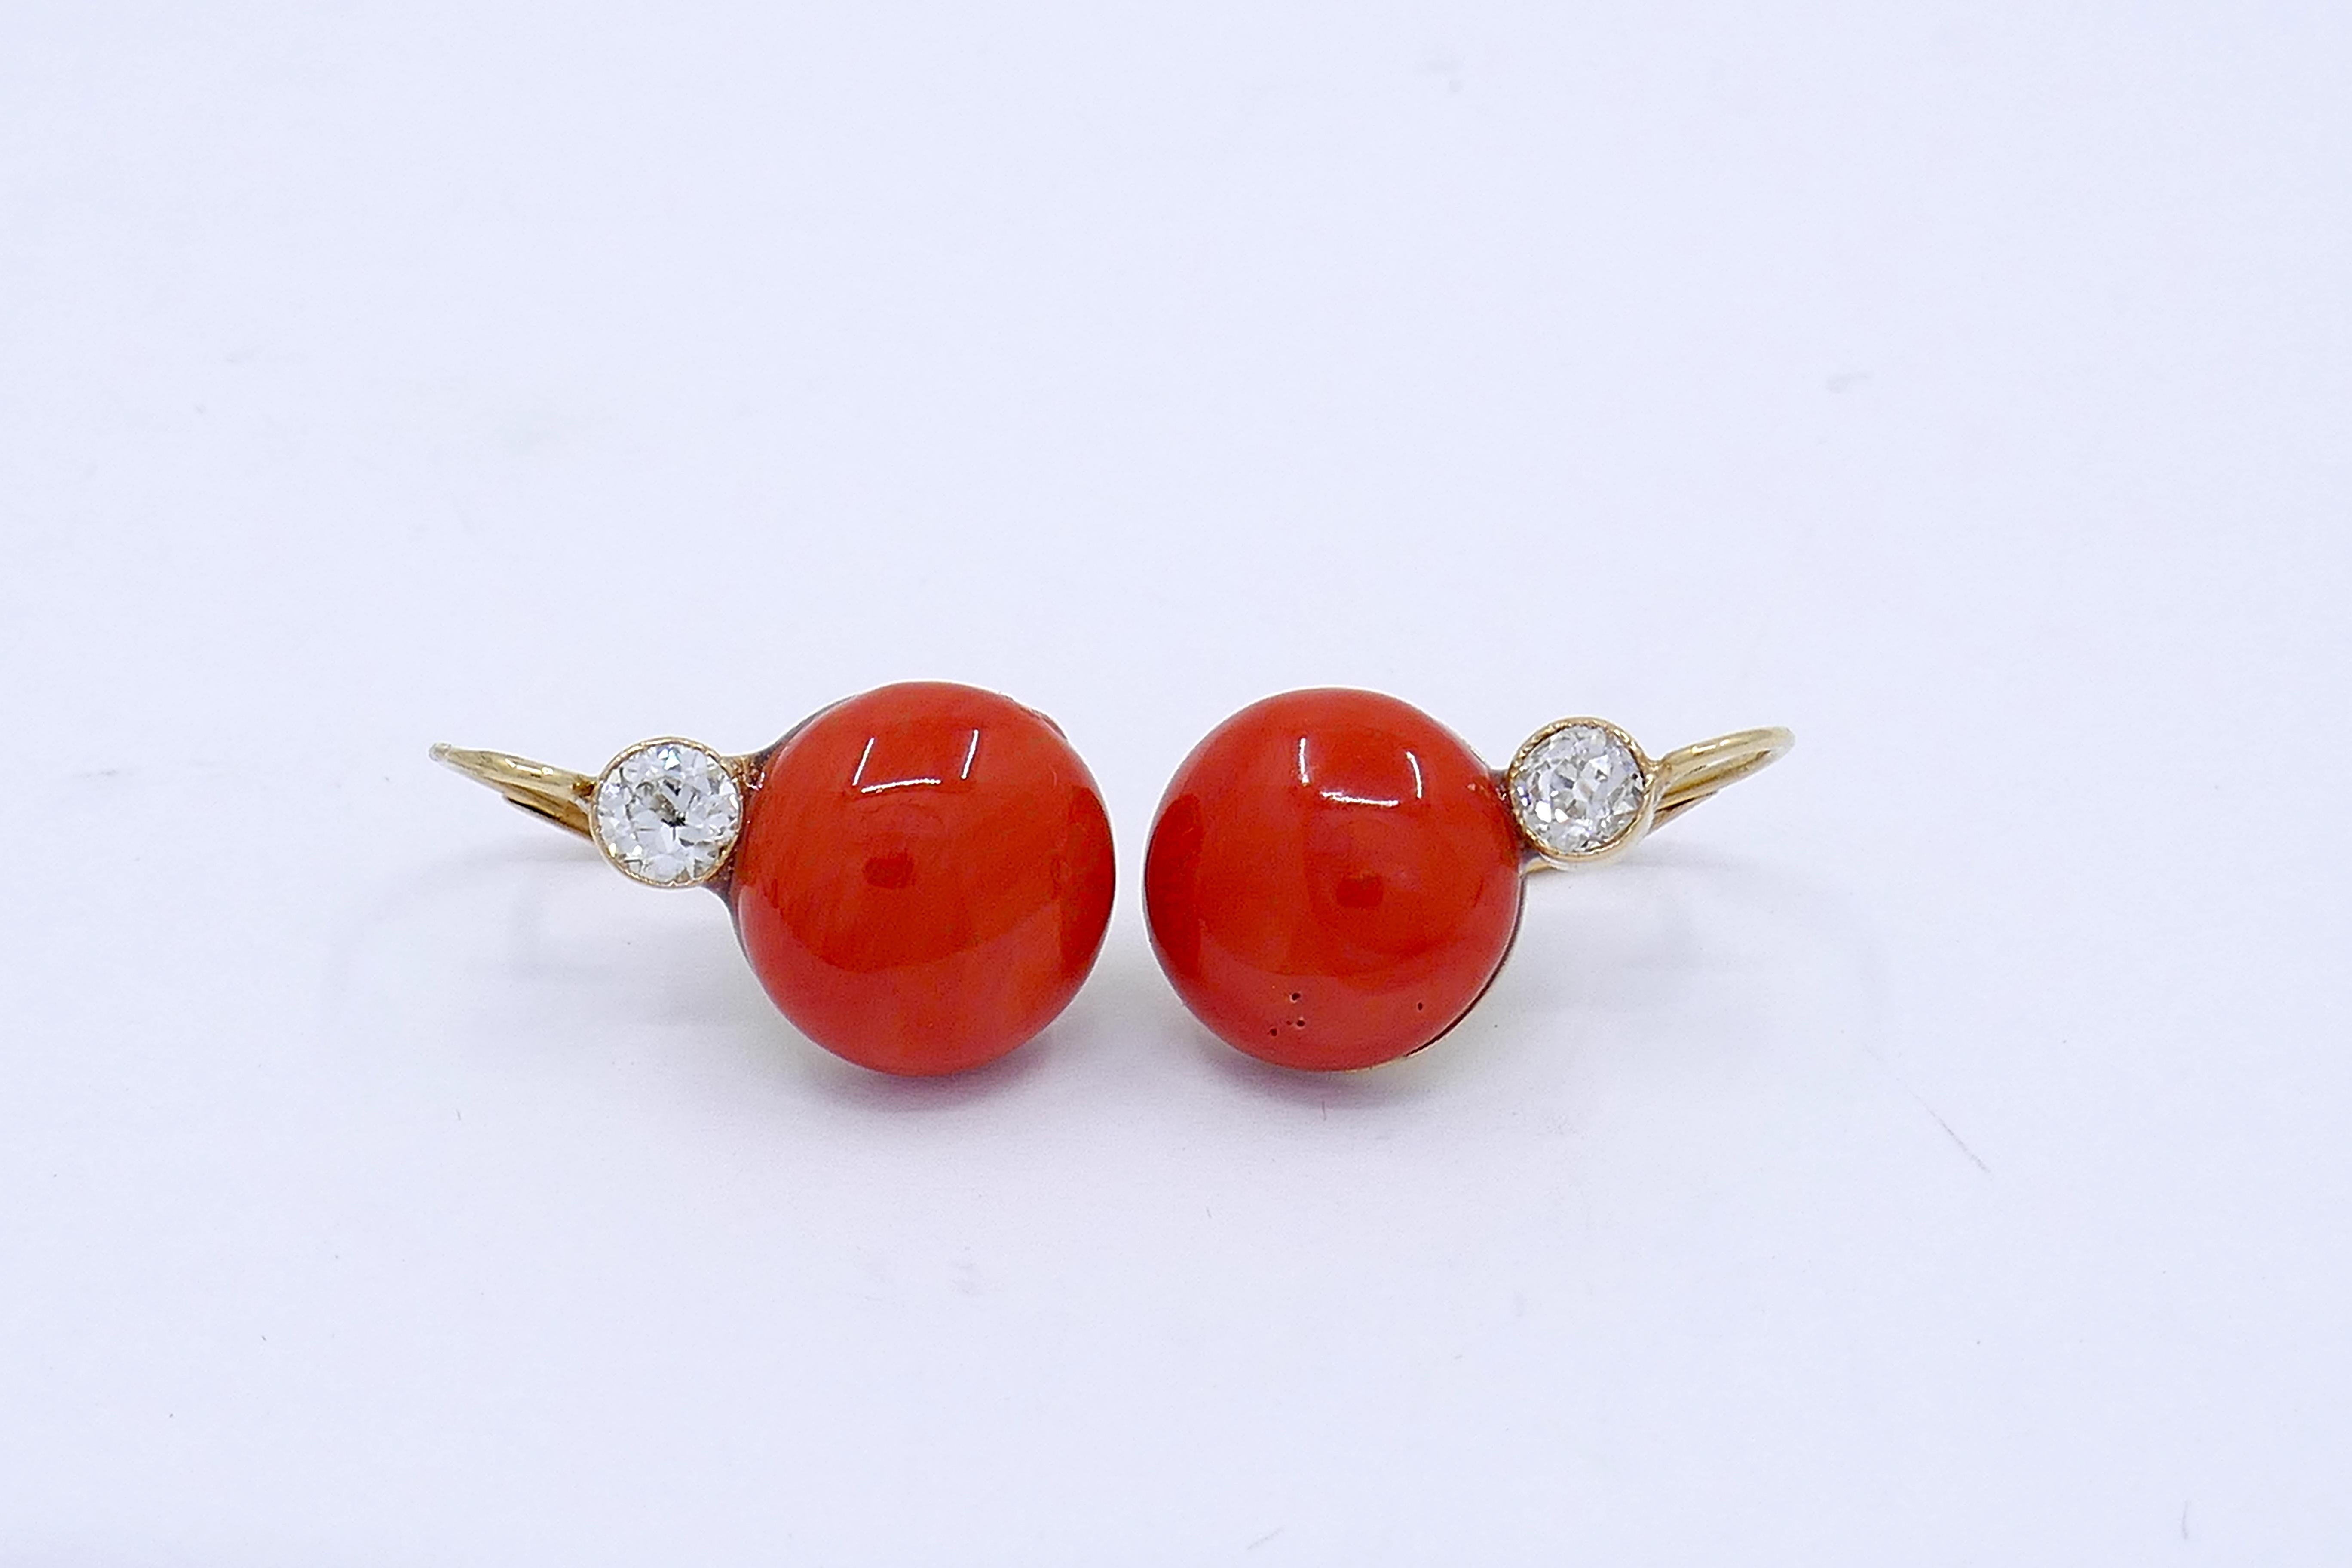 Women's 1900s Coral button Earrings with Diamonds and 14k Gold